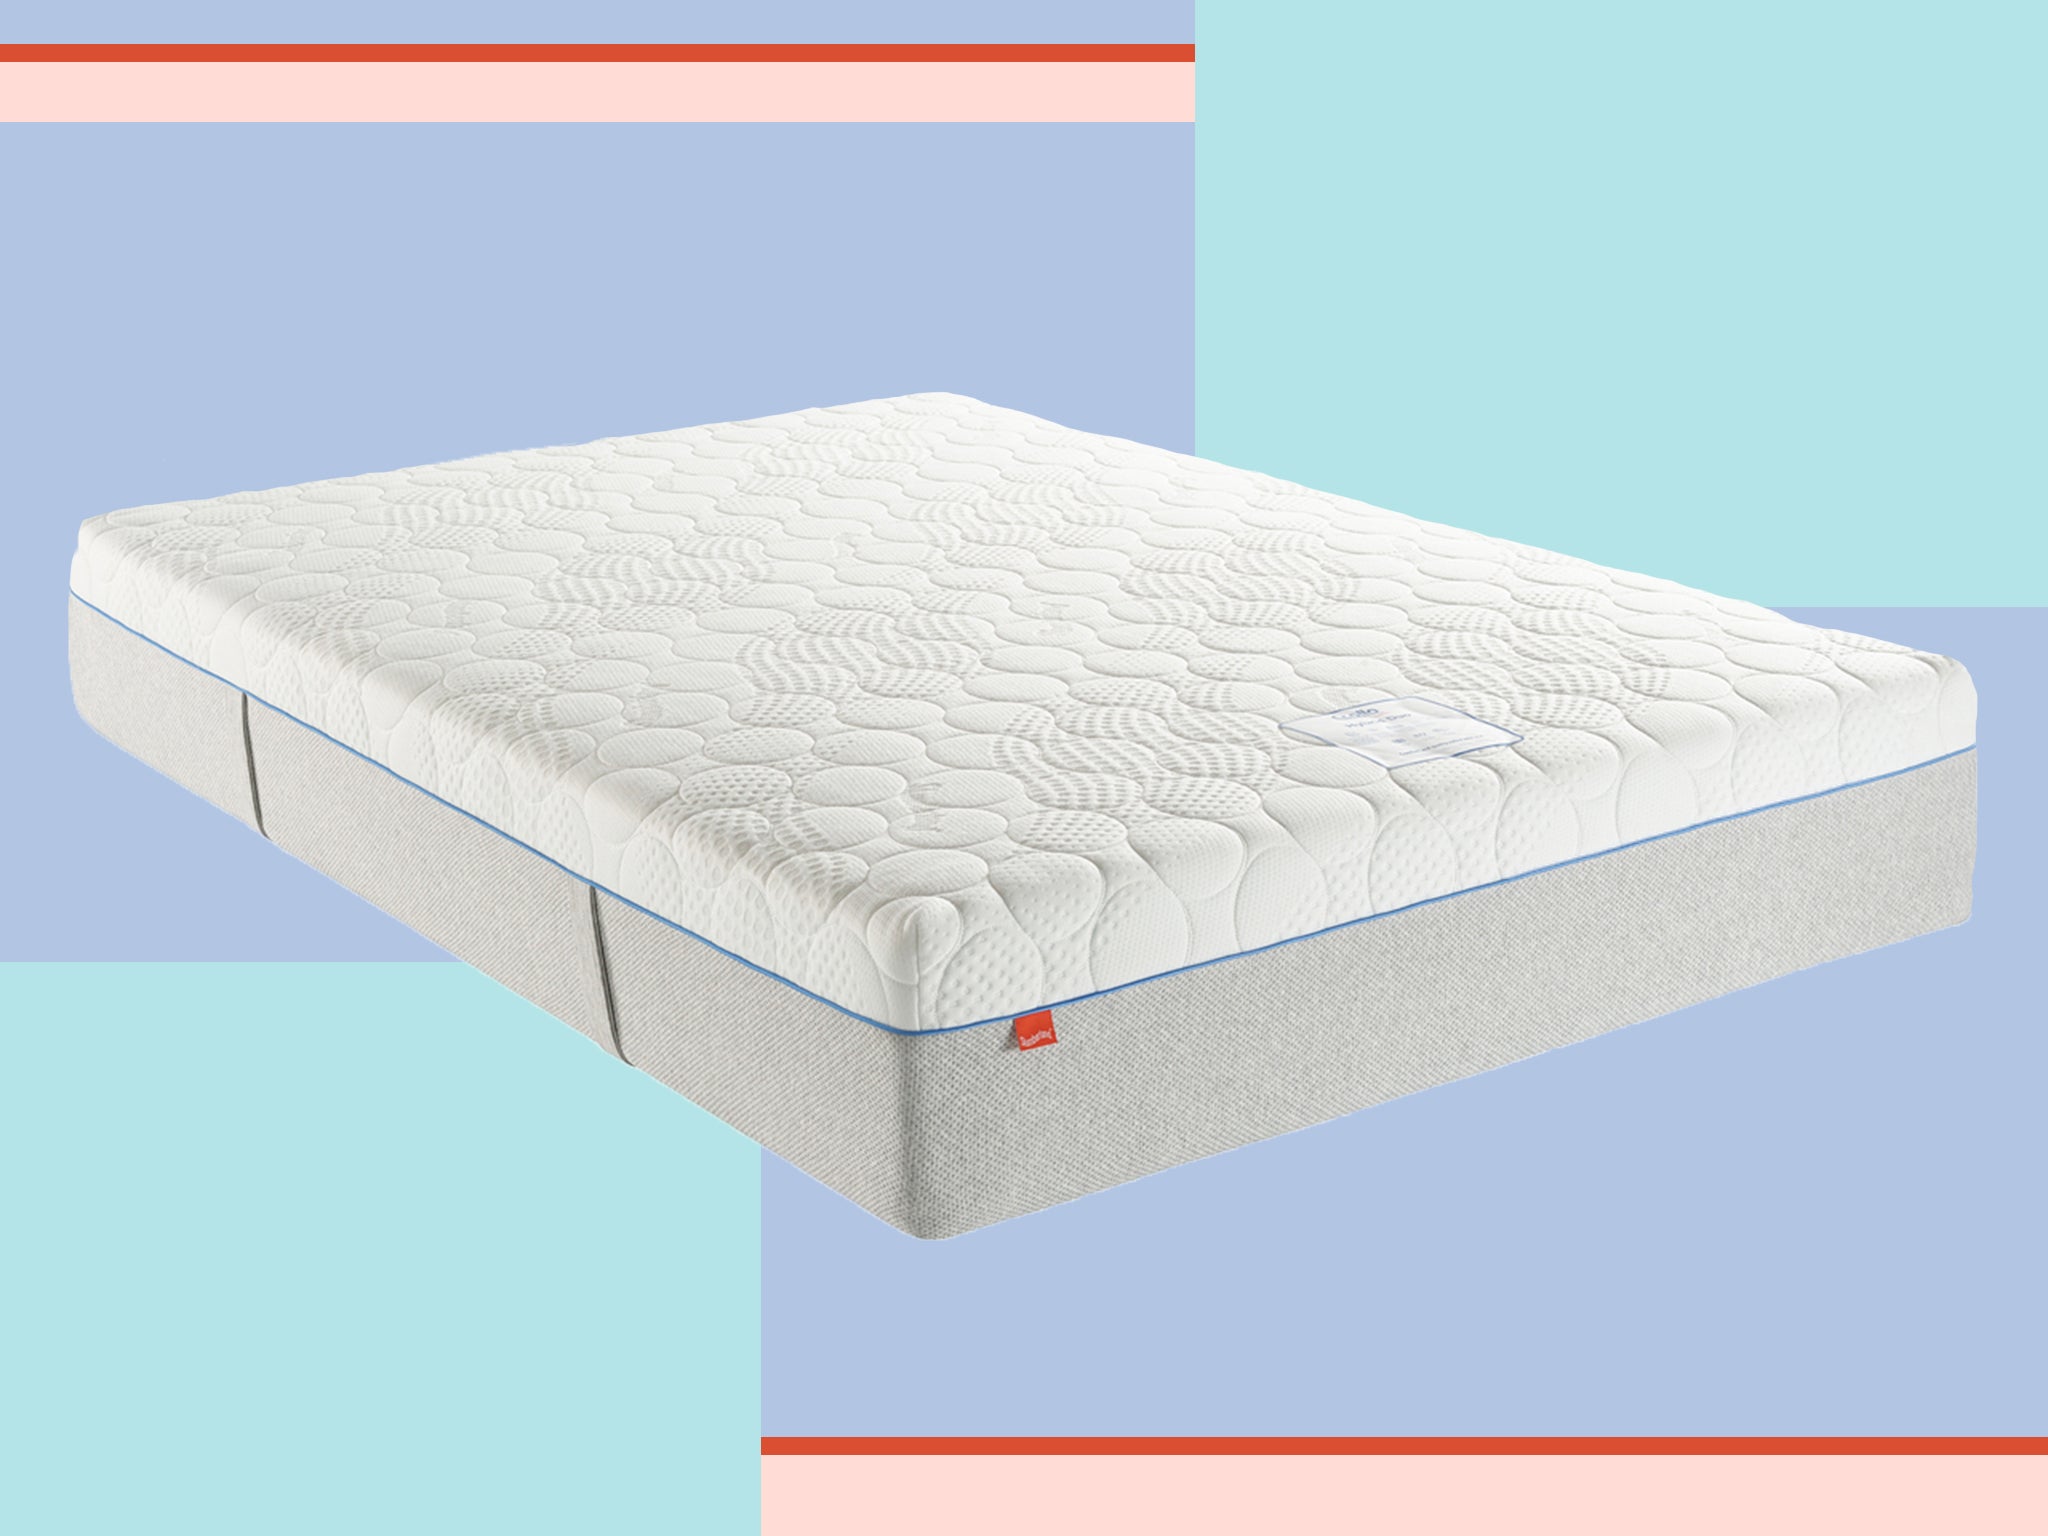 This eco-friendly mattress surface is made from recycled bottles